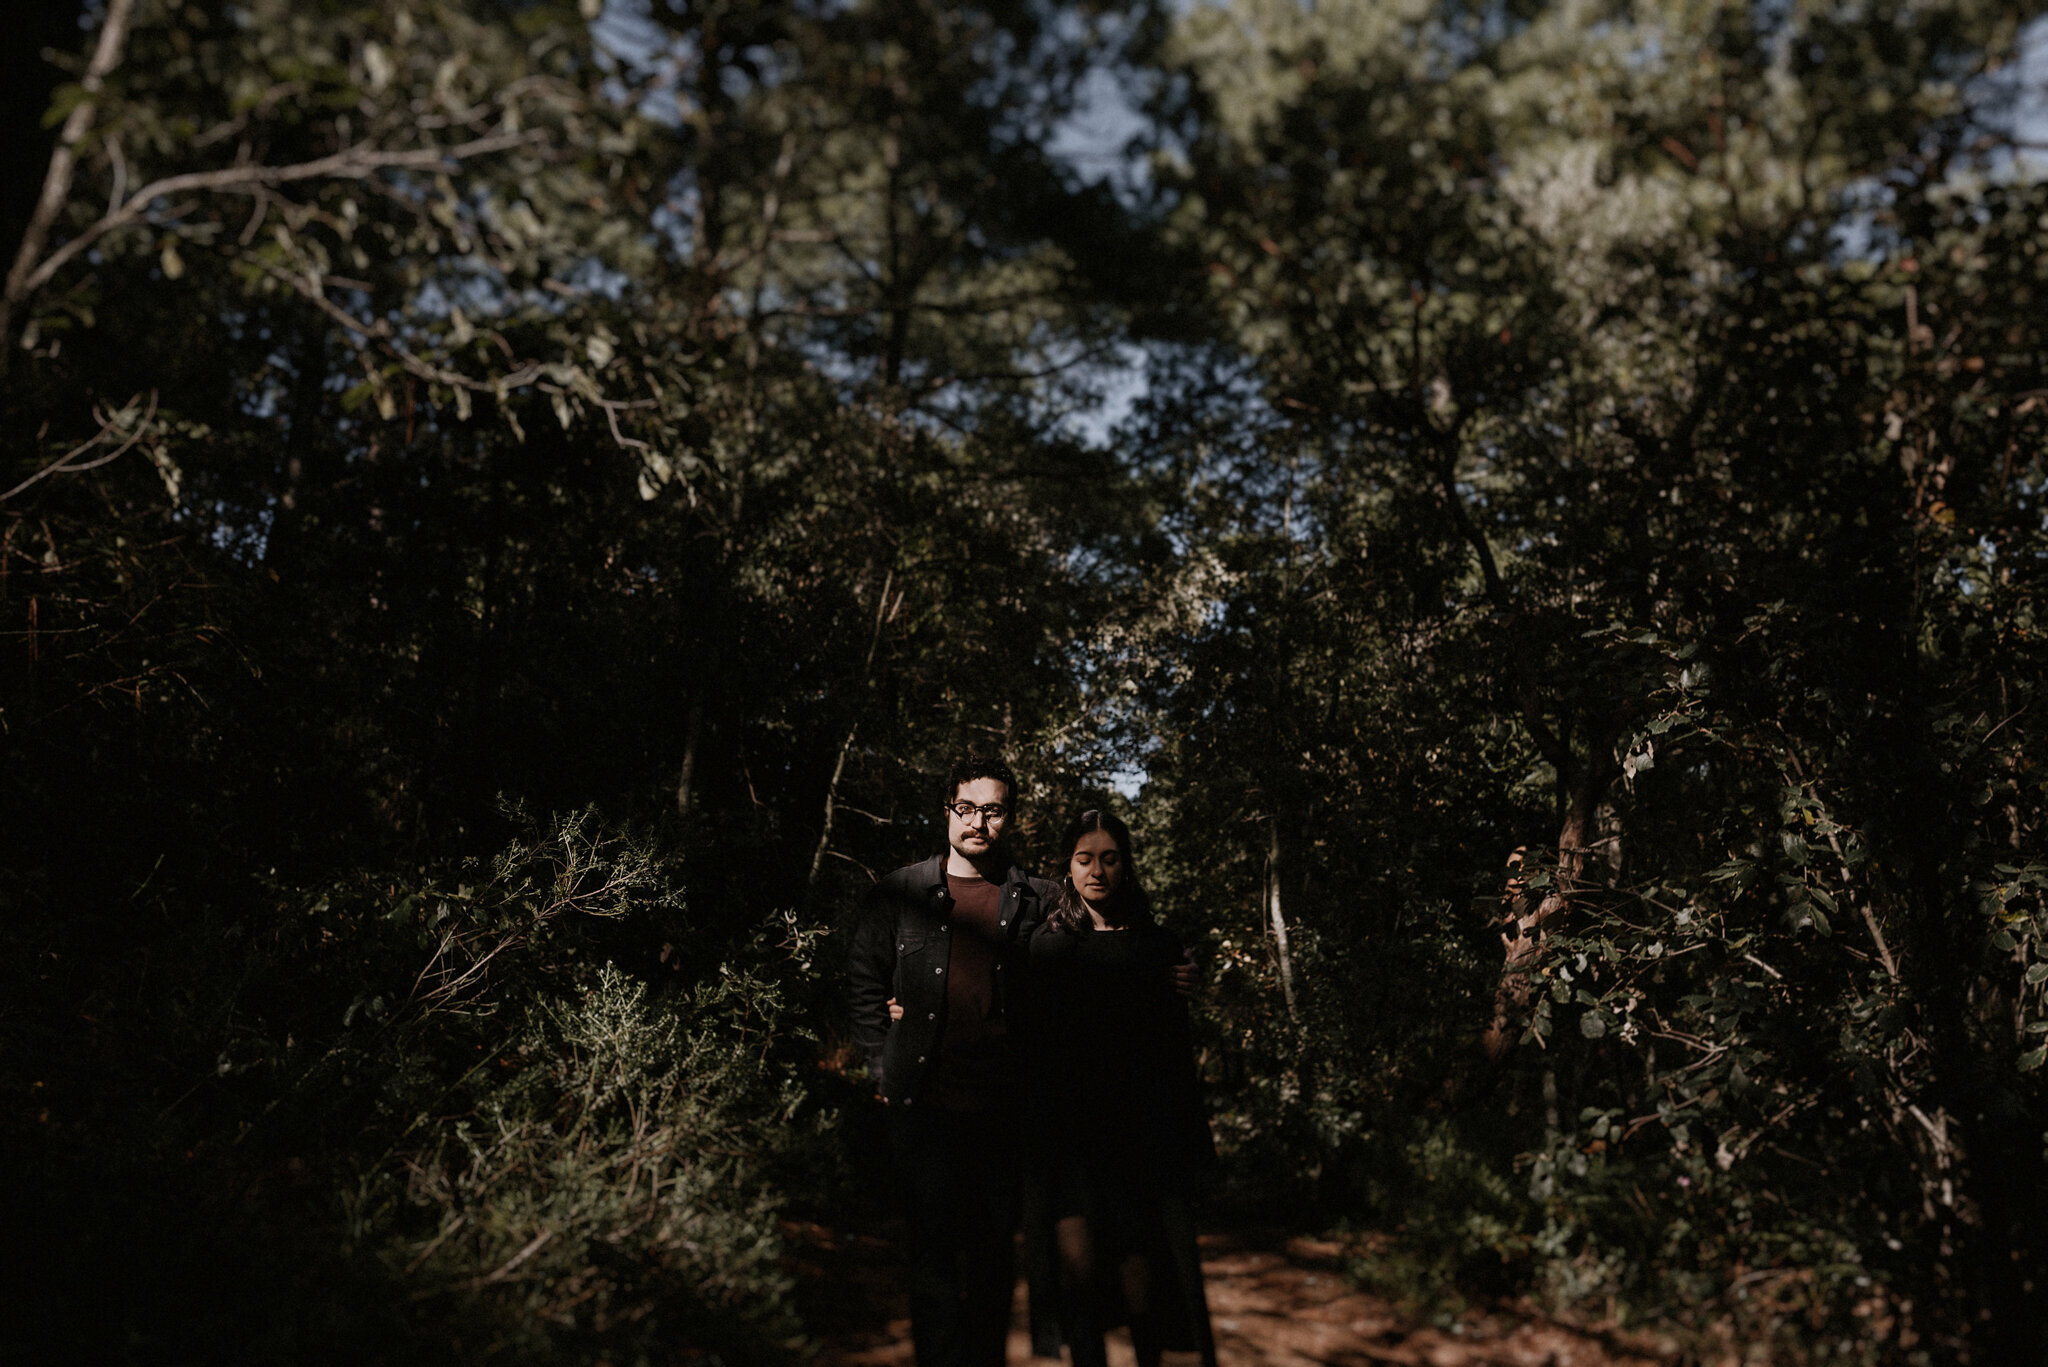 MEXICO COUPLE SESSION - IN THE WOODS - ANNA SAUZA PHOTOGRAPHY -86.jpg